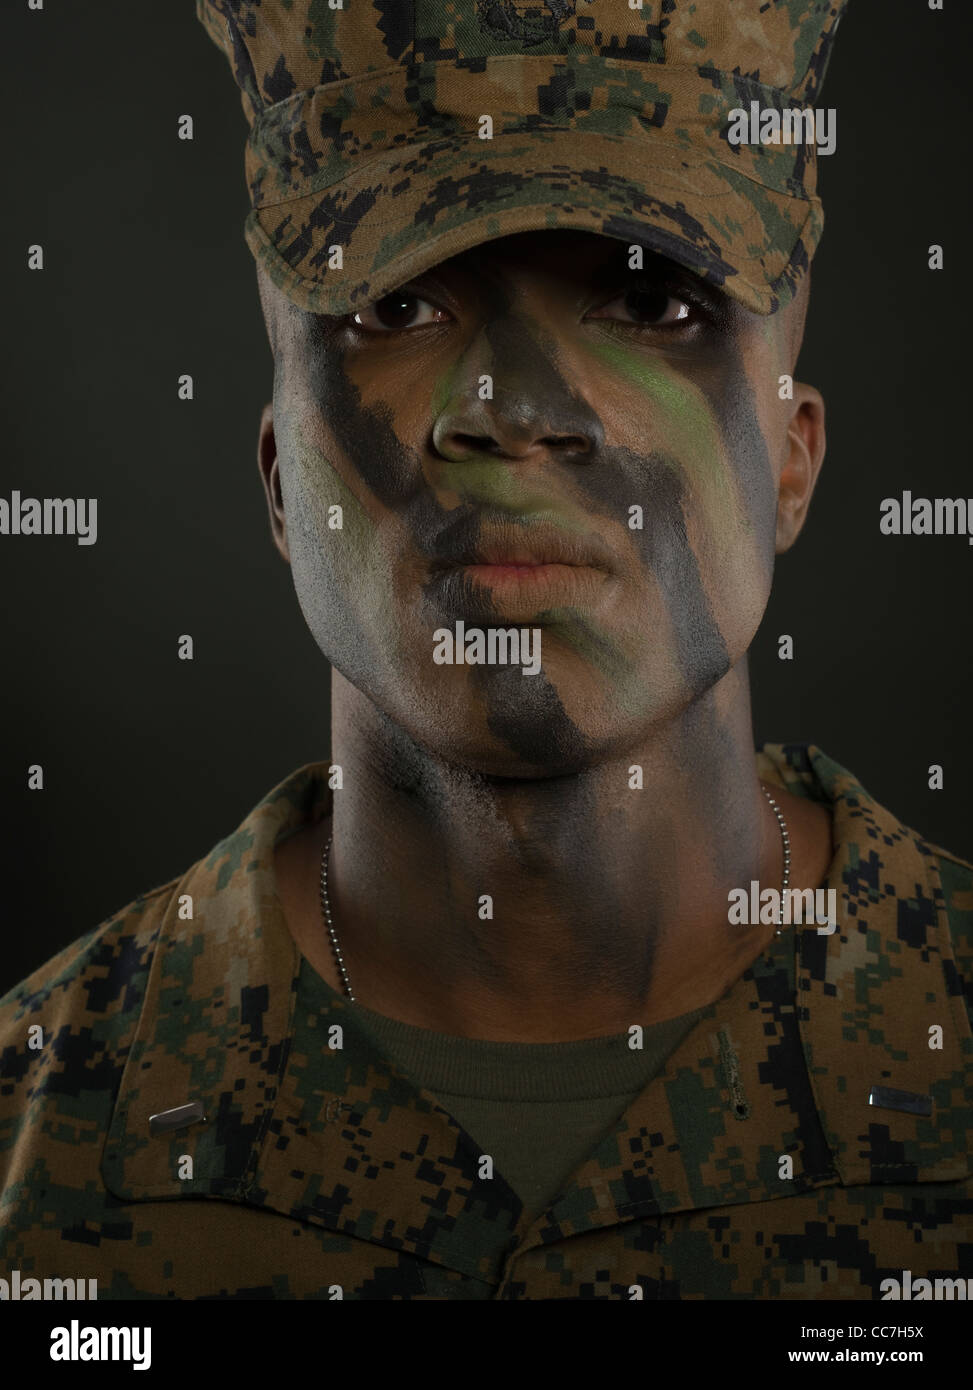 United States Marine Corps Officer in MARPAT digital camouflage uniform and camo face paint Stock Photo